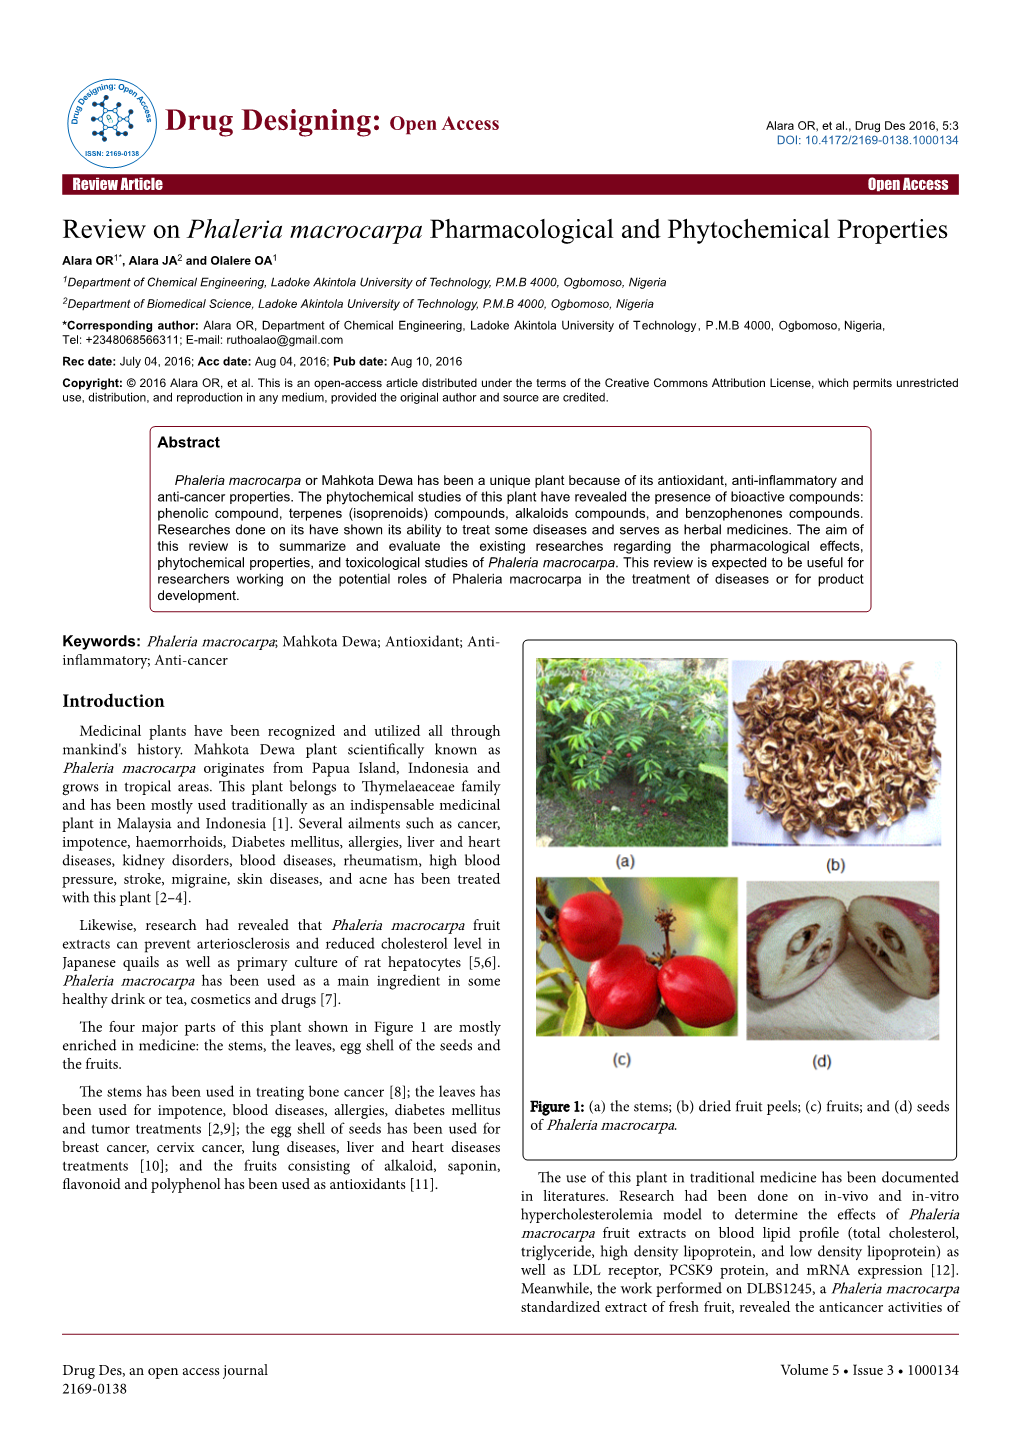 Review on Phaleria Macrocarpa Pharmacological And